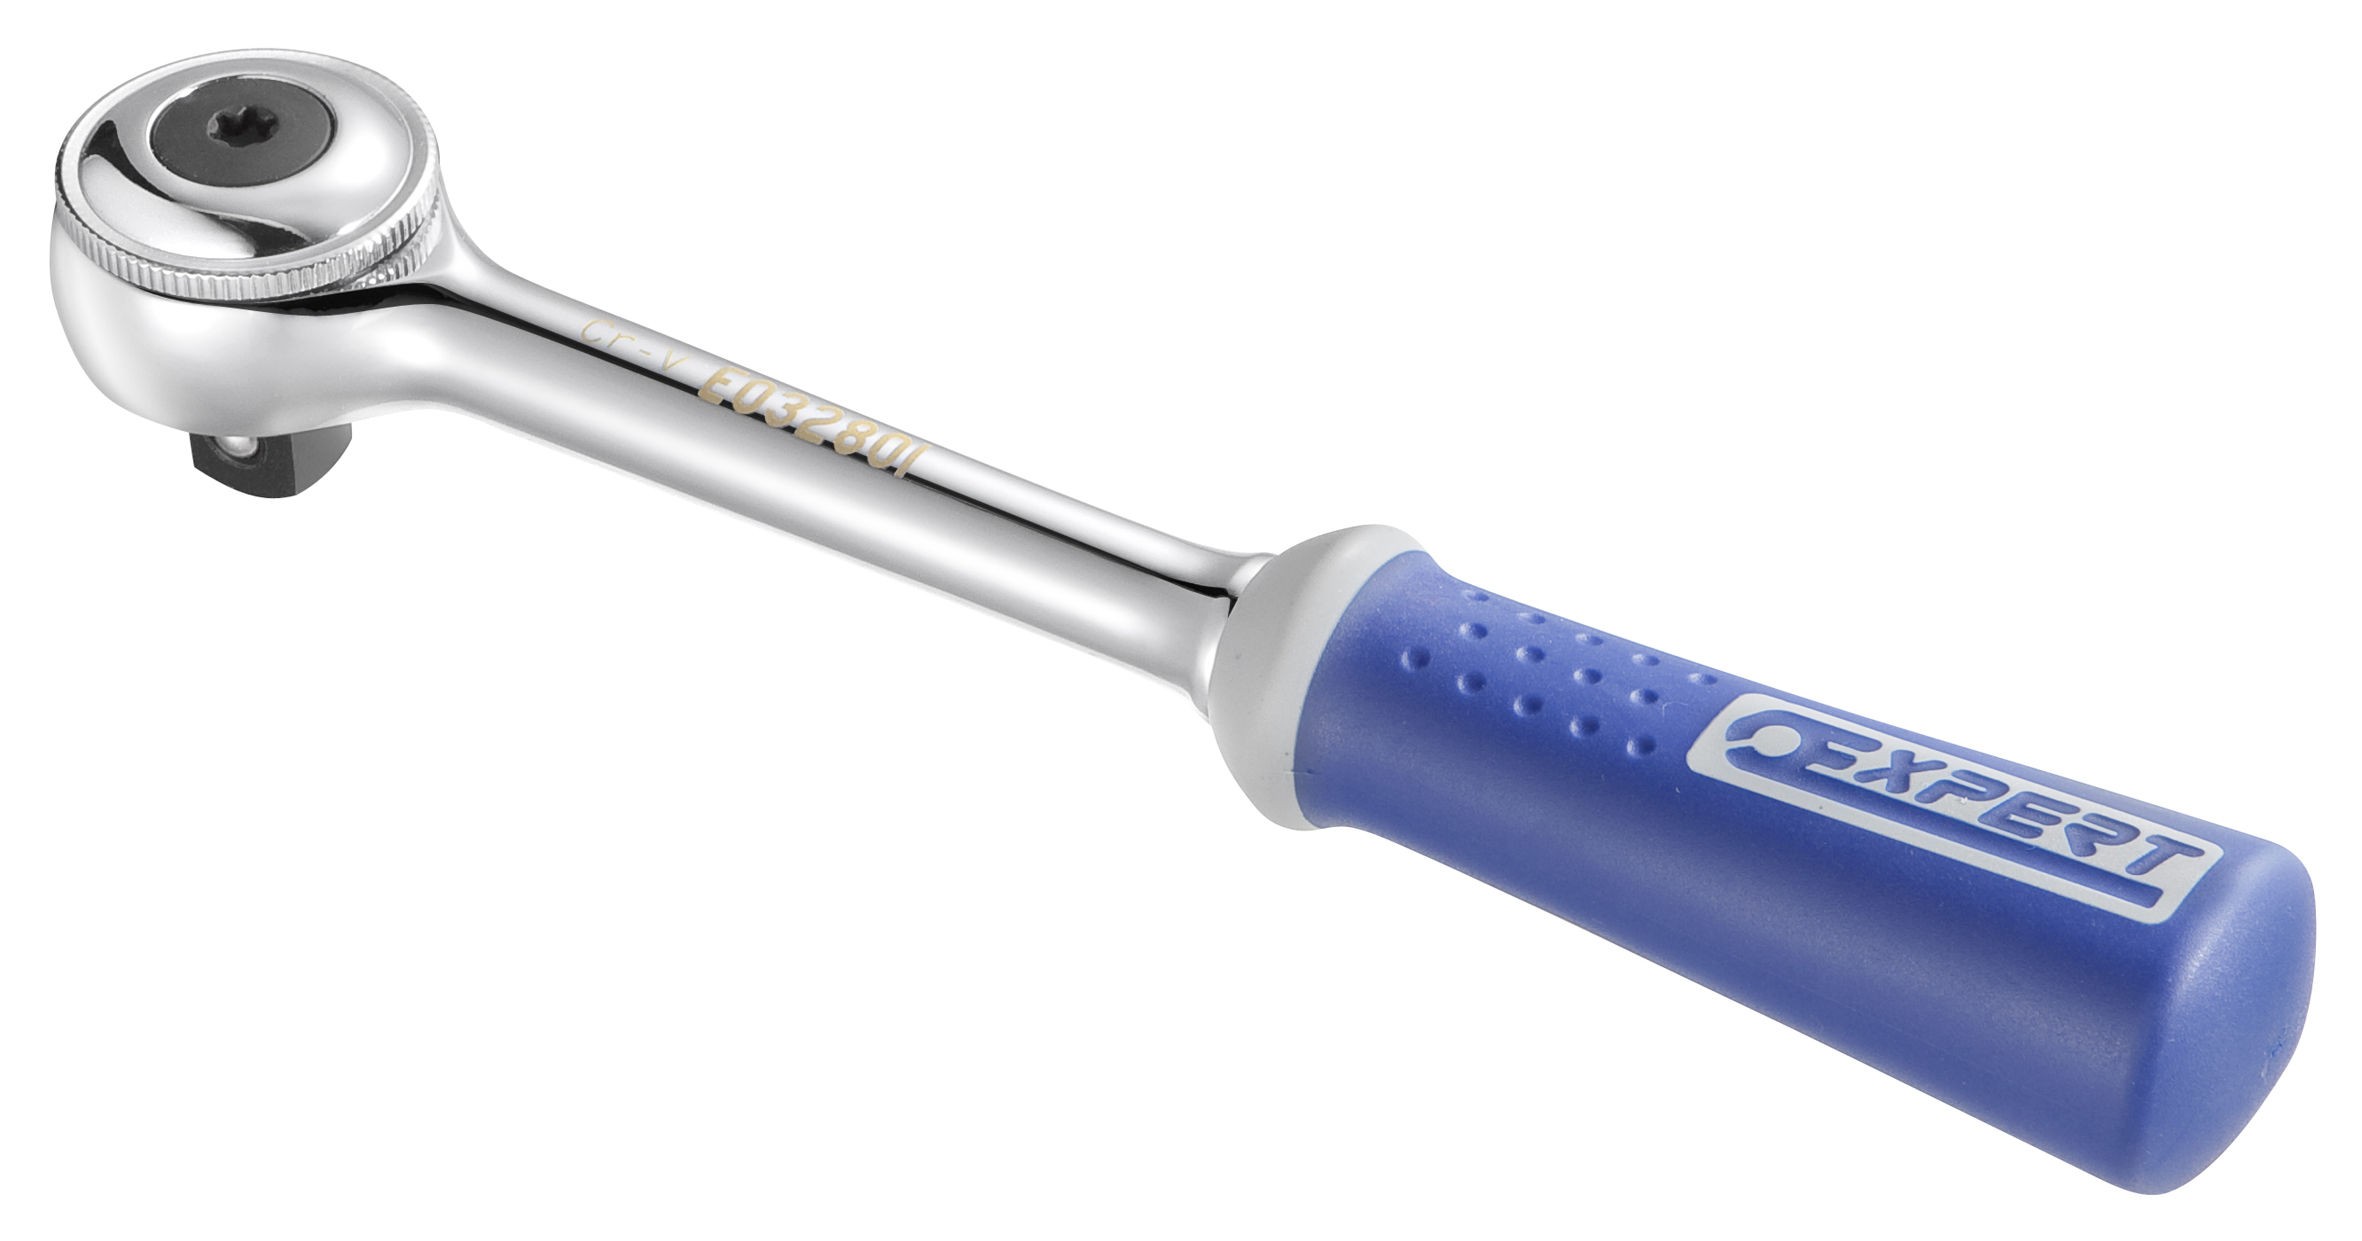 1/2" RATCHET WITH COMPACT ROUND HEAD FACOM EXPERT